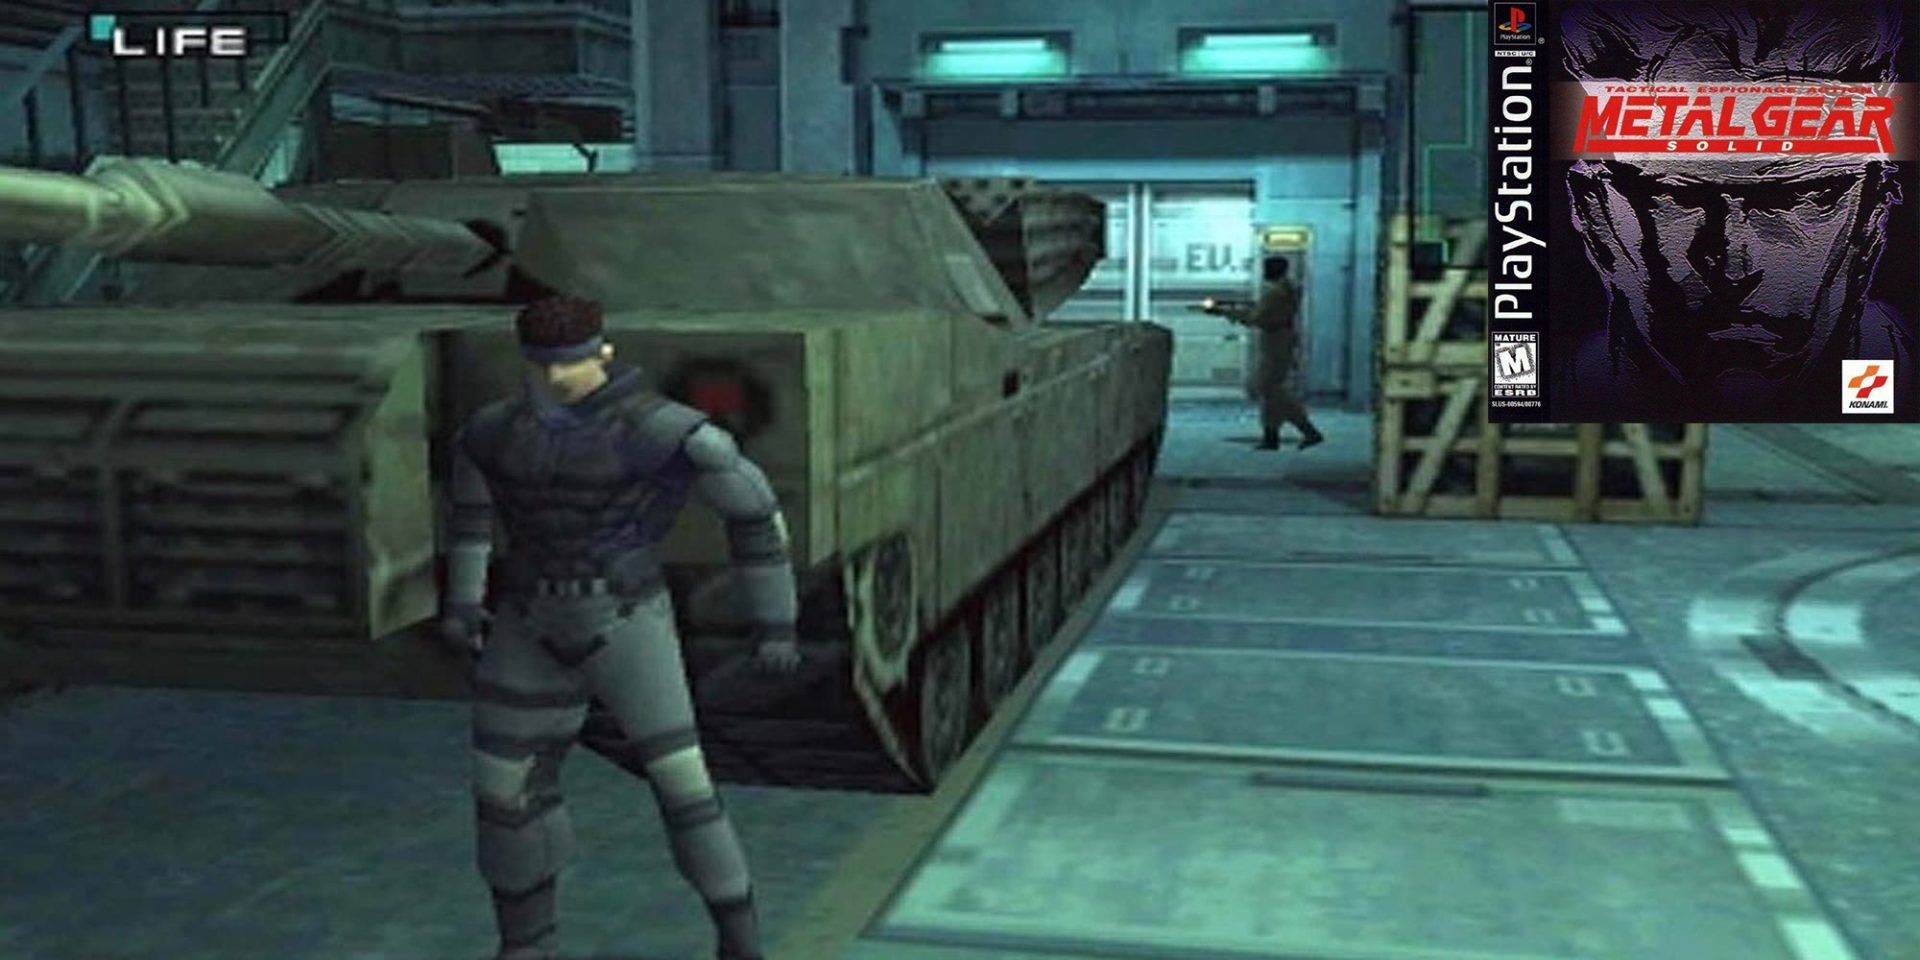 Screenshot from Metal Gear Solid PS1, with the game's cover in the top right corner.